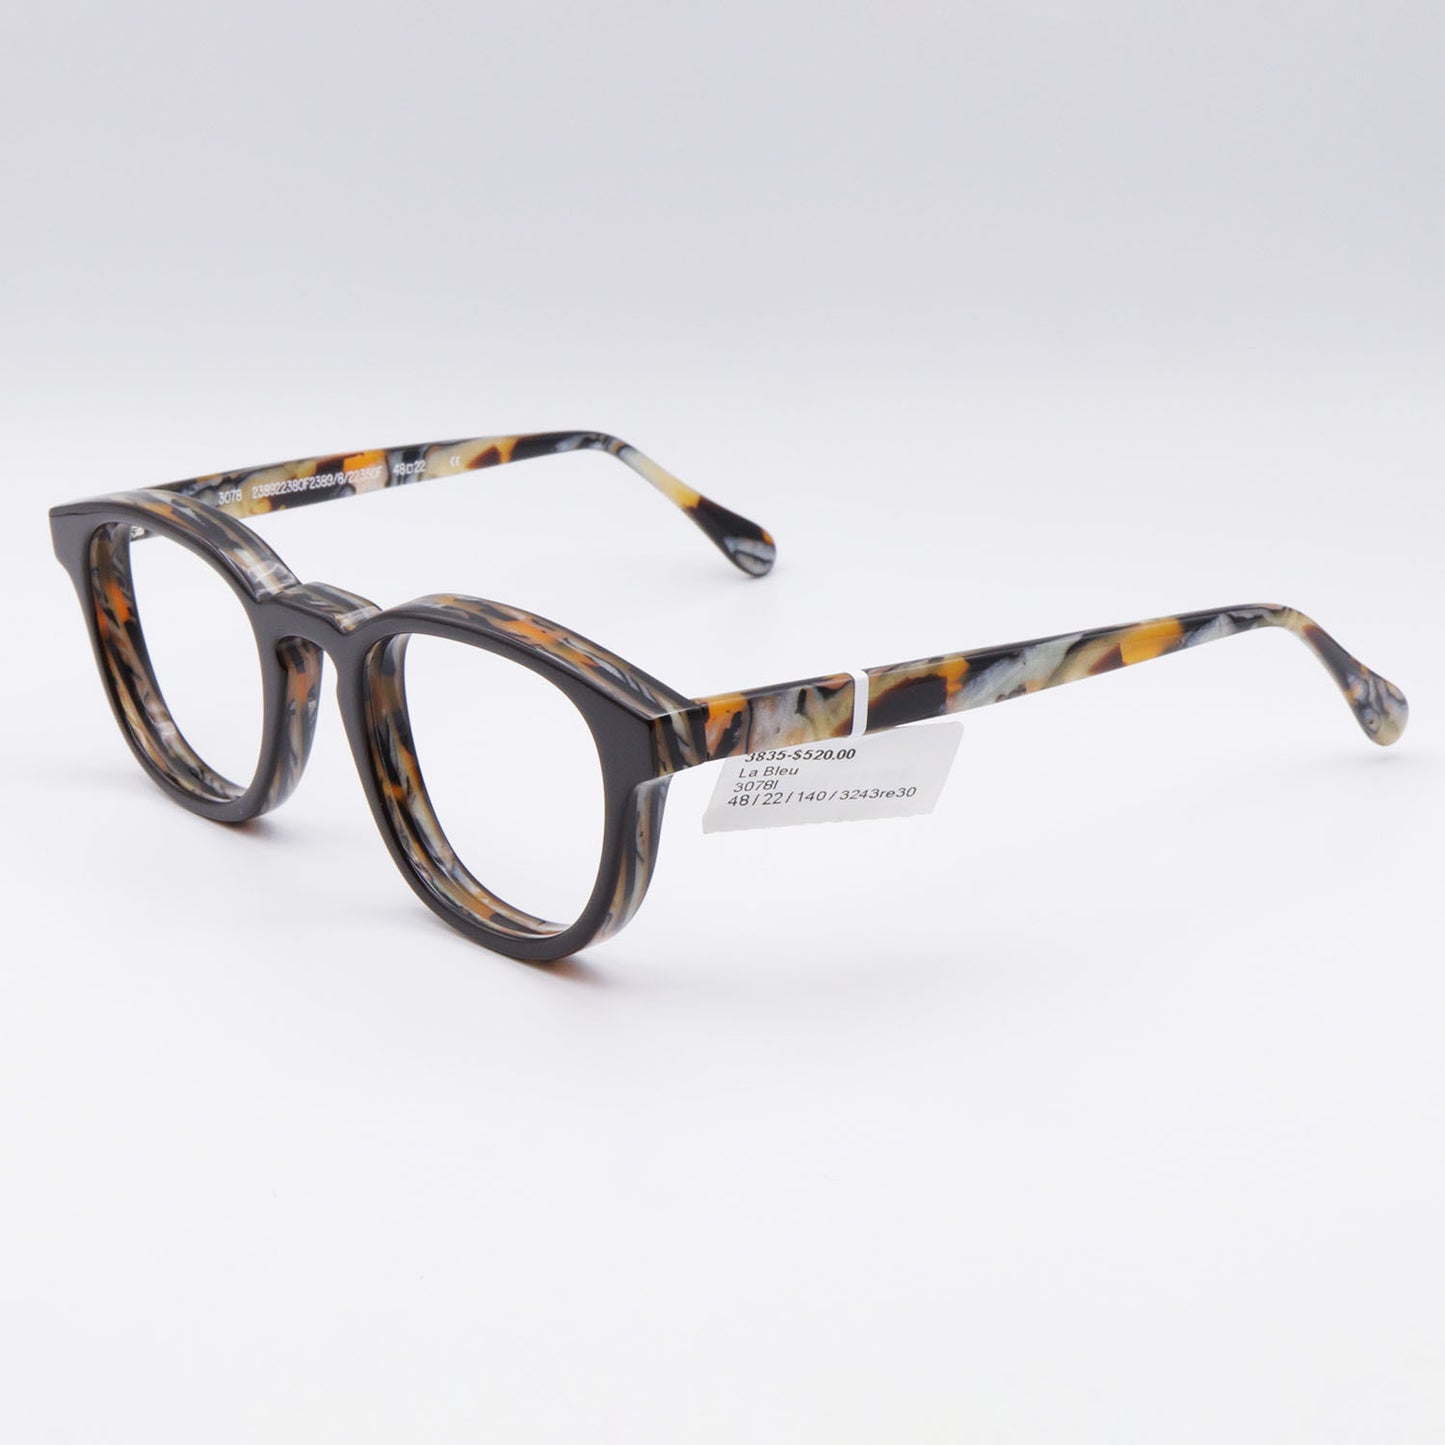 Rounded Square 3078 by La Bleu Brown Frames Glasses